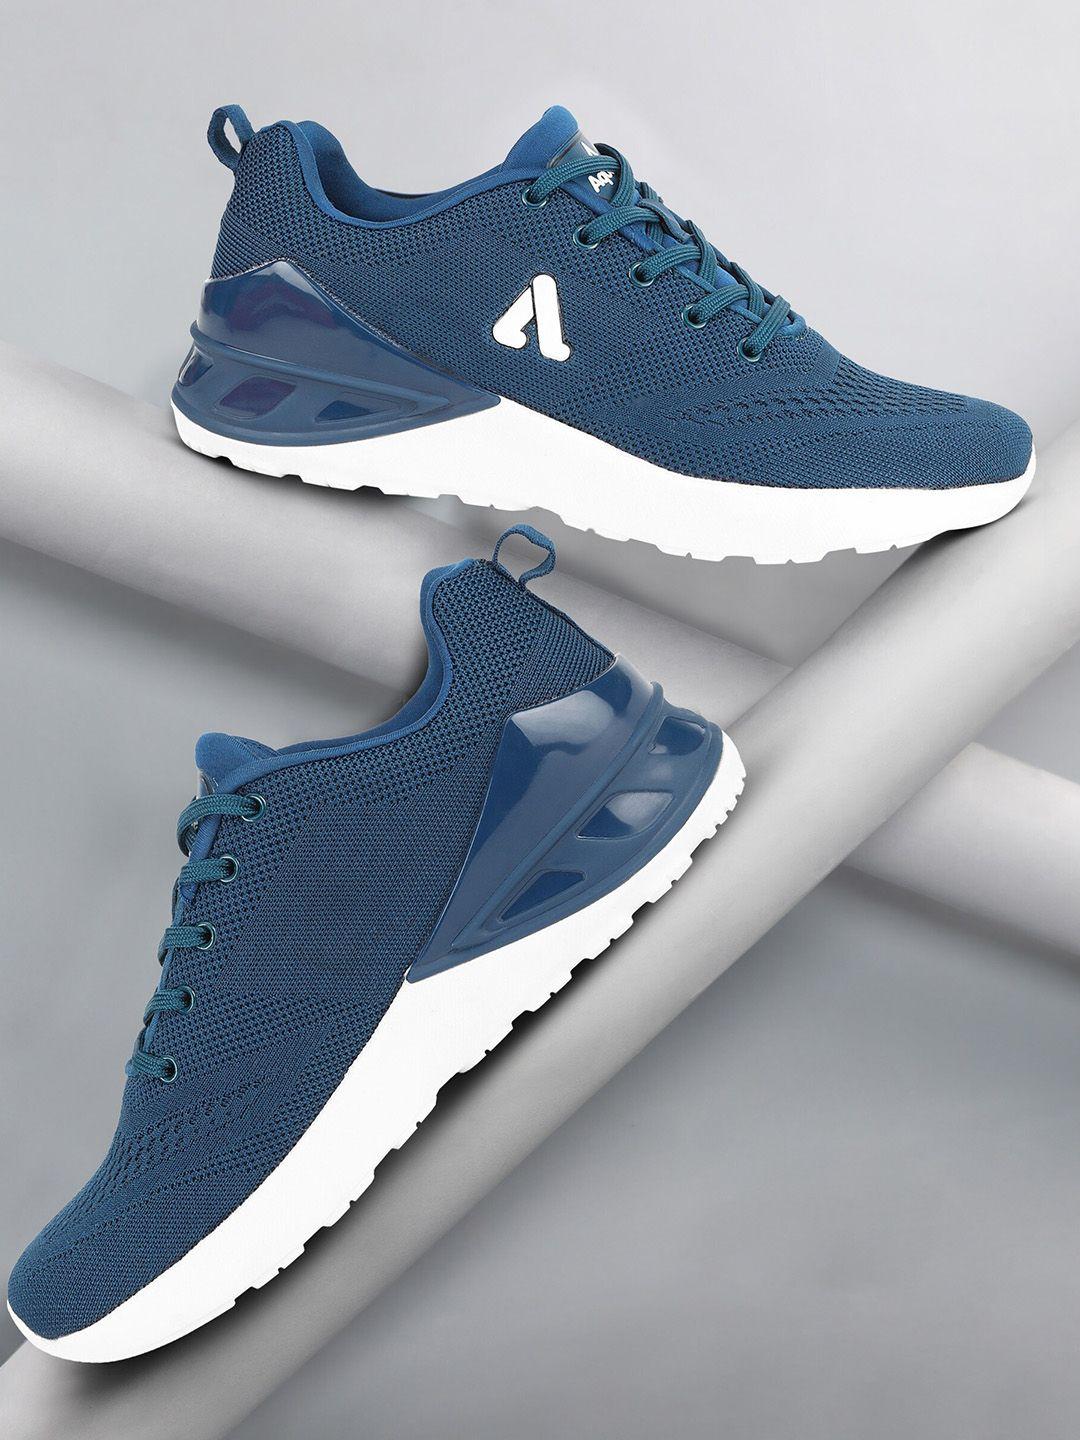 aqualite-men-elastic-fit-technology-non-marking-running-sports-shoes